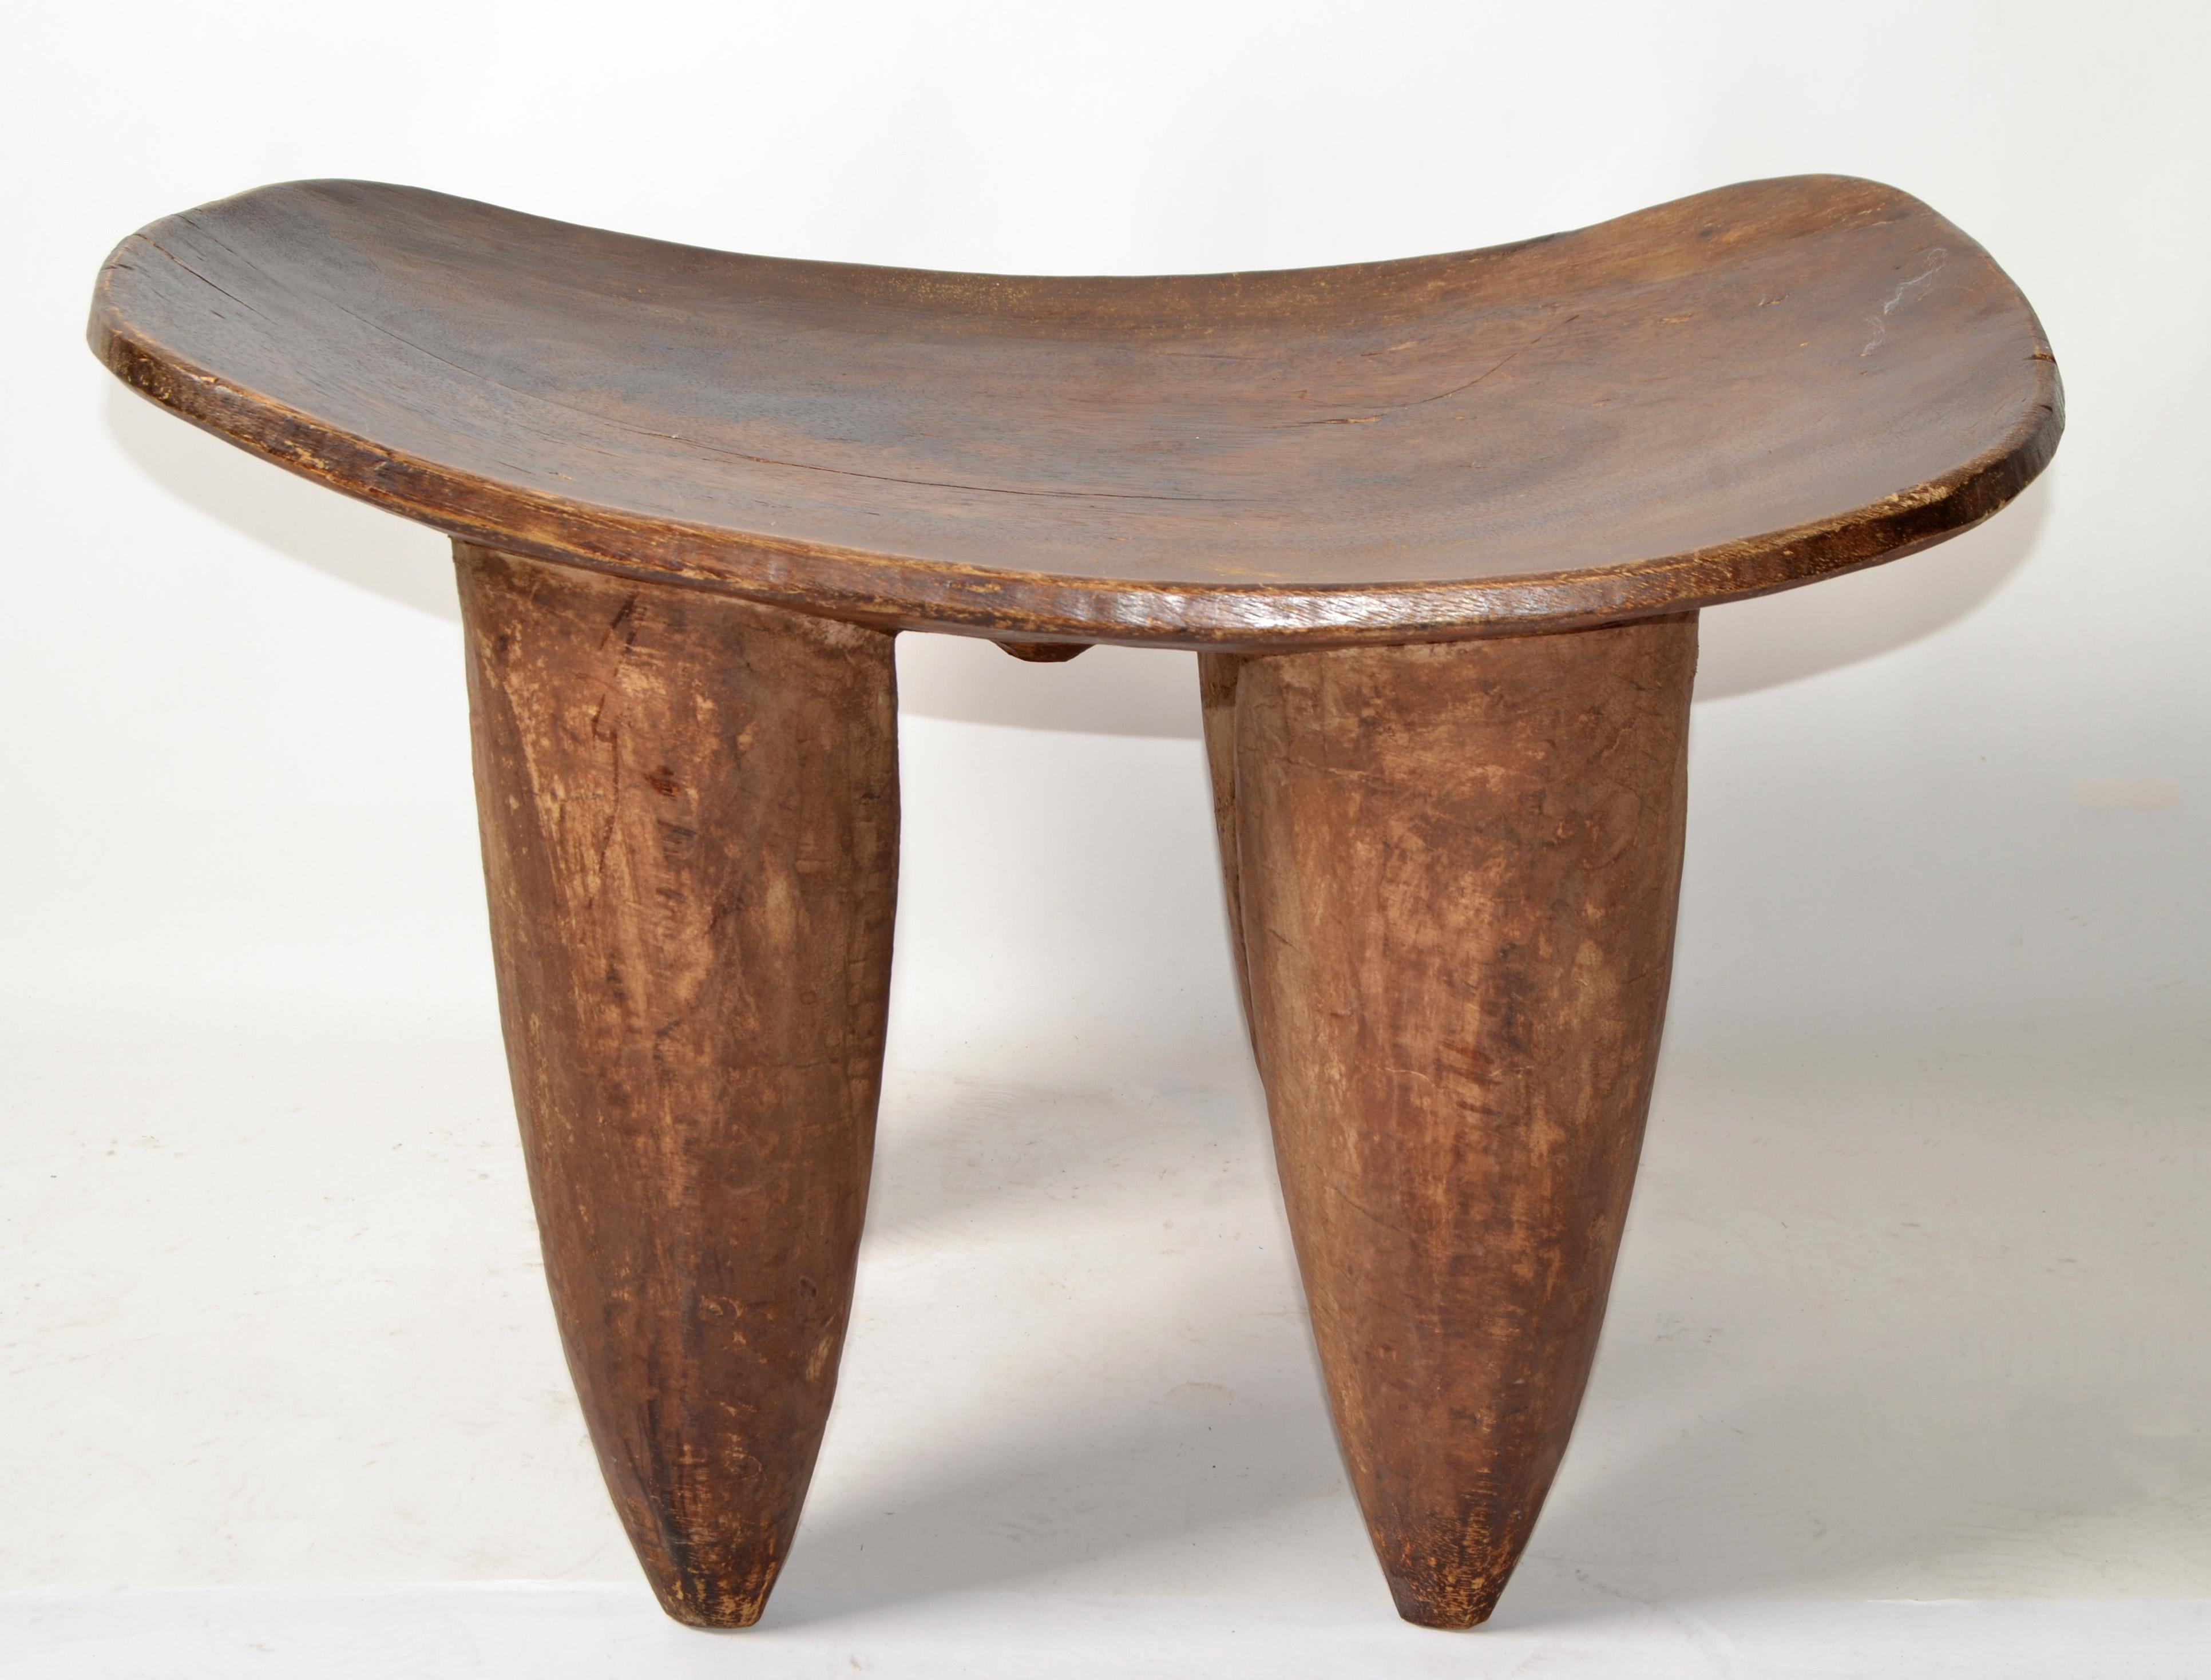 Vintage Andrianna Shamaris Senufo Style African tribal art very unique wood stool, bench, side table or headrest from a single block of wood with stunning wood grain and patina.
Sturdy and firm with cone style legs. 
The stool is left in its raw